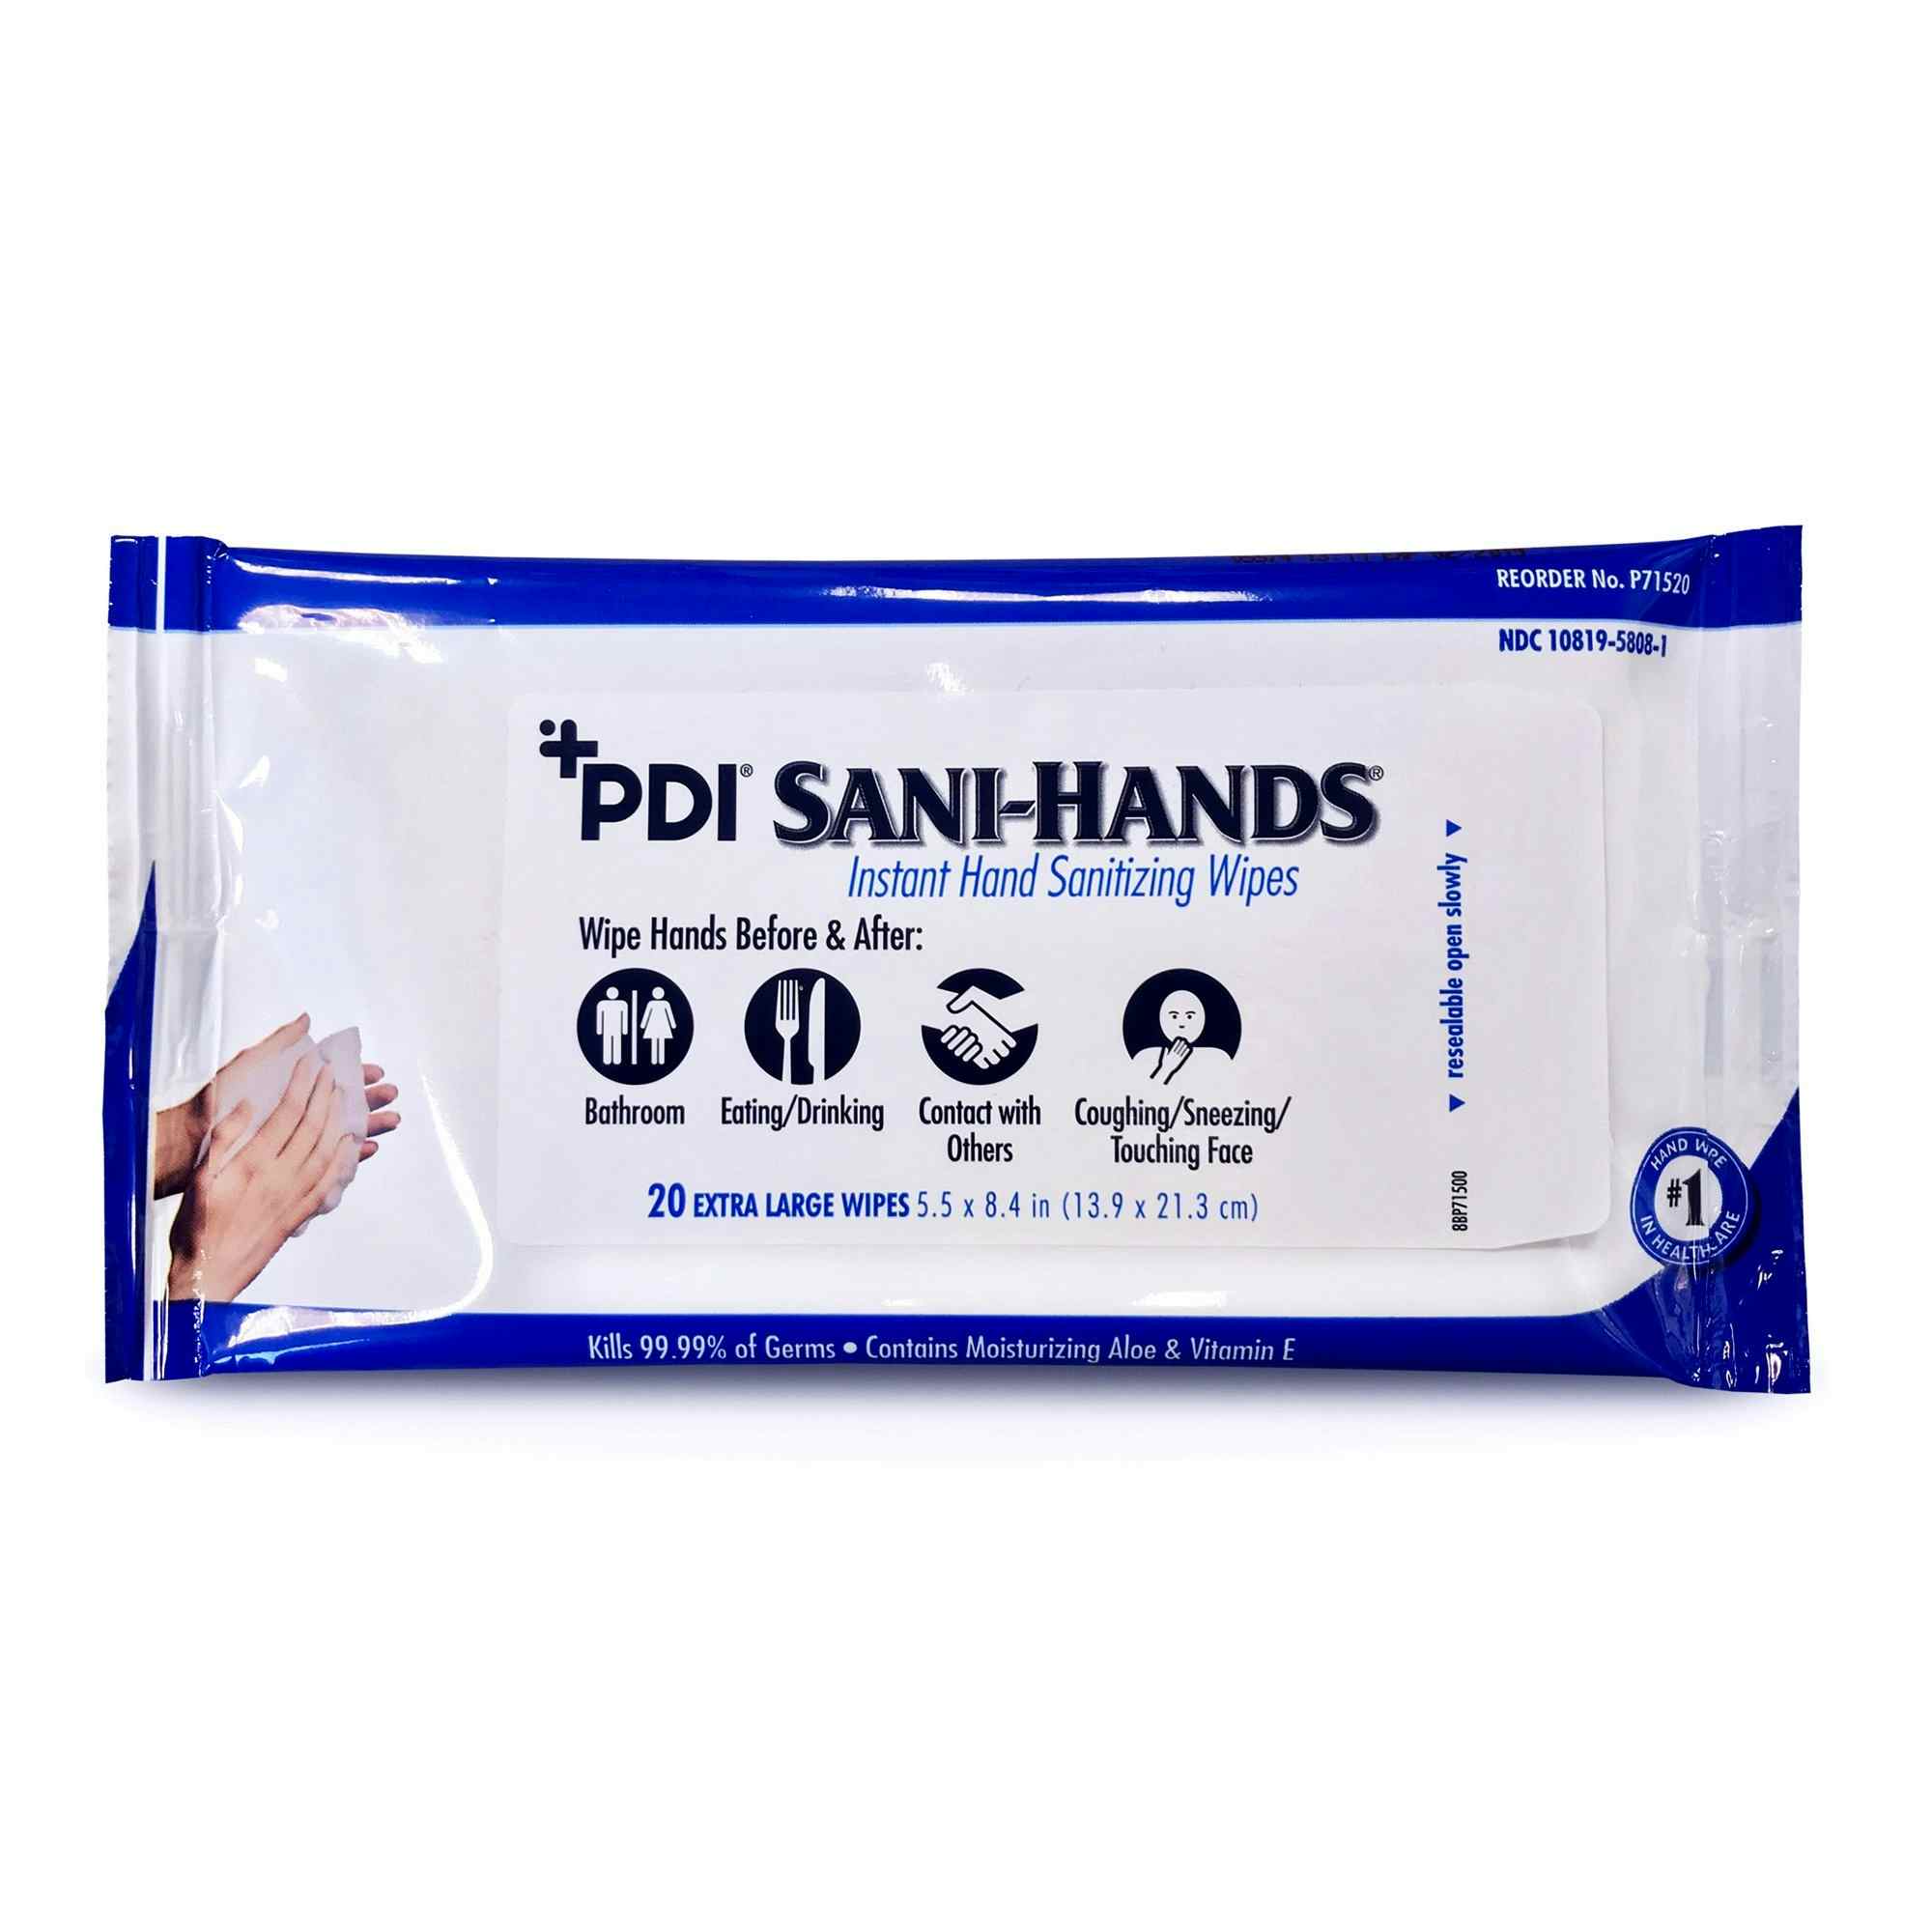 PDI Sani-Hands Instant Hand Sanitizing Wipes, P71520, Case of 48